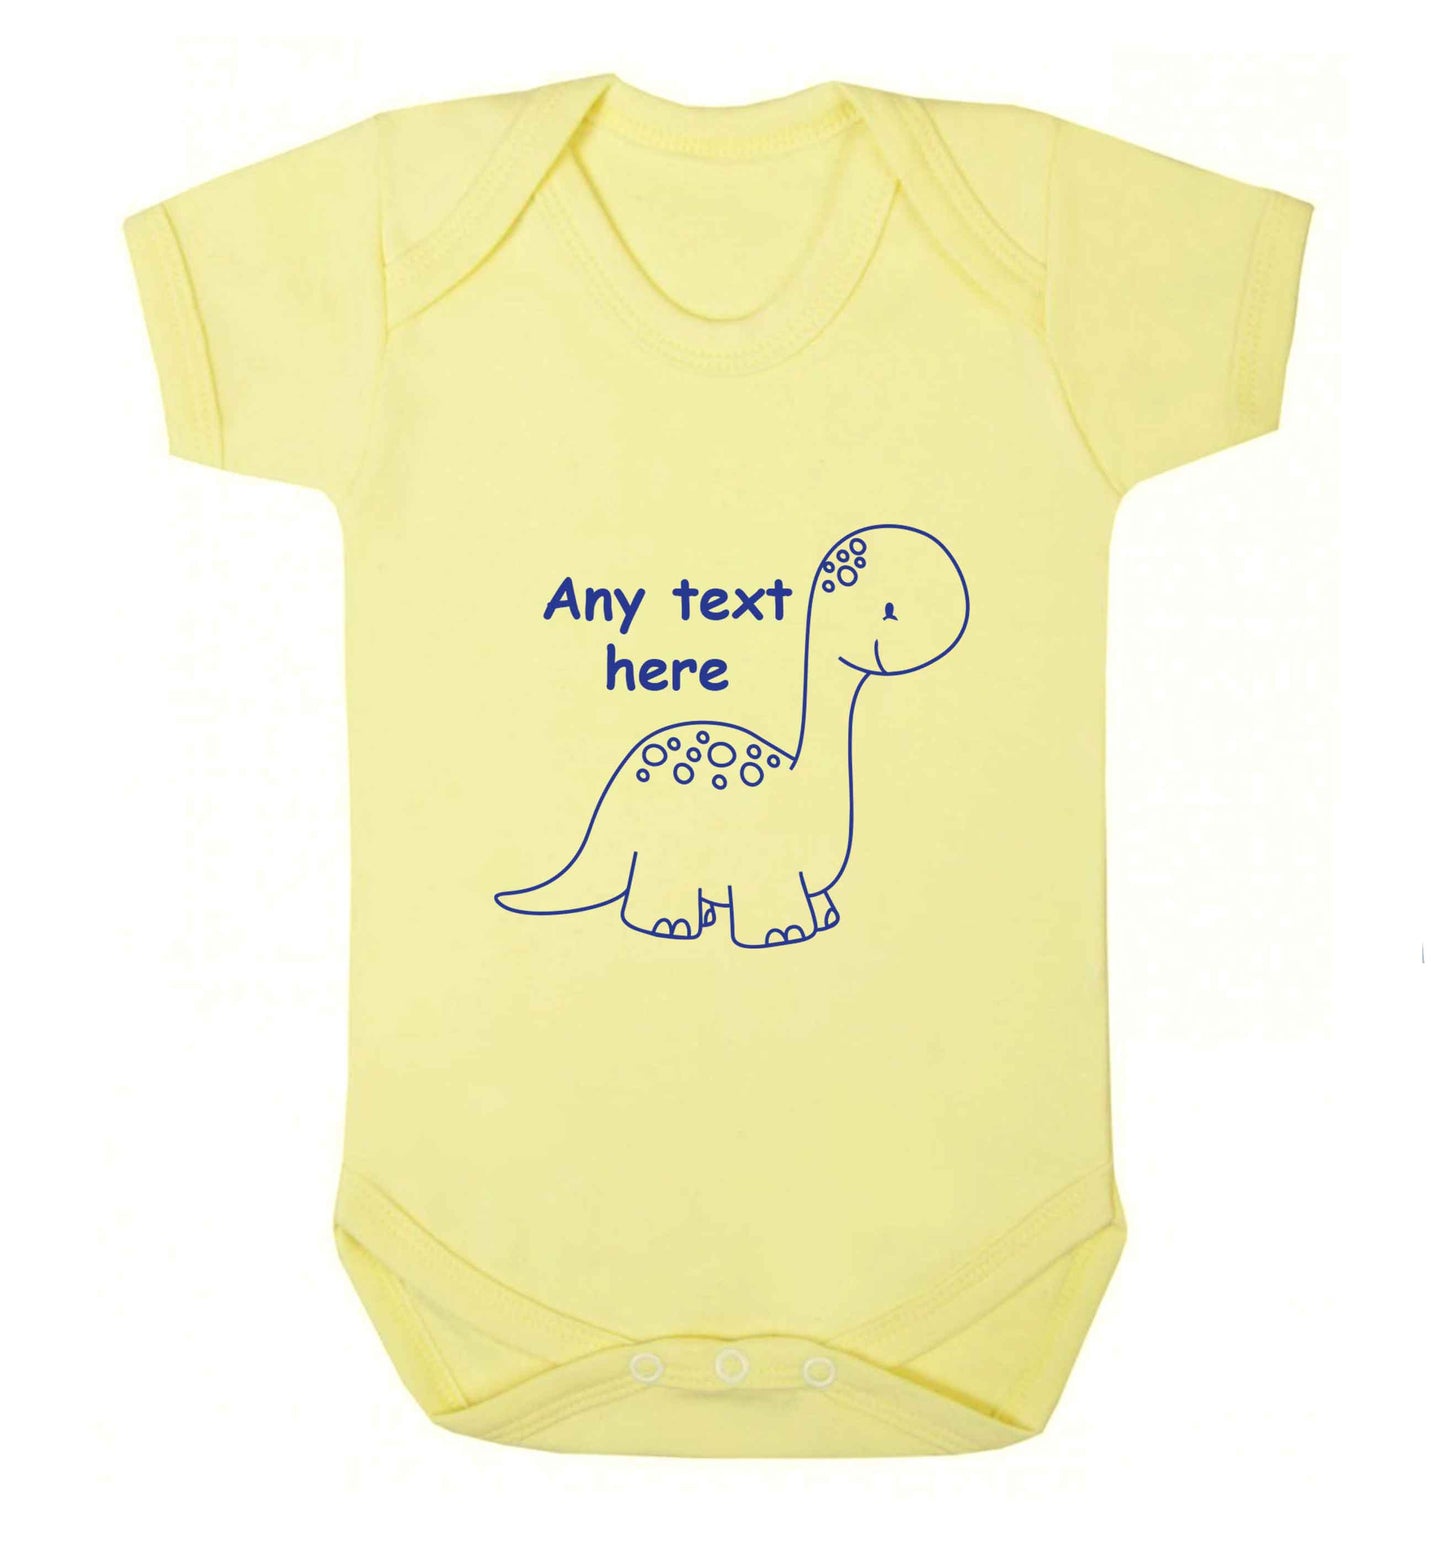 Dinosaur any text baby vest pale yellow 18-24 months